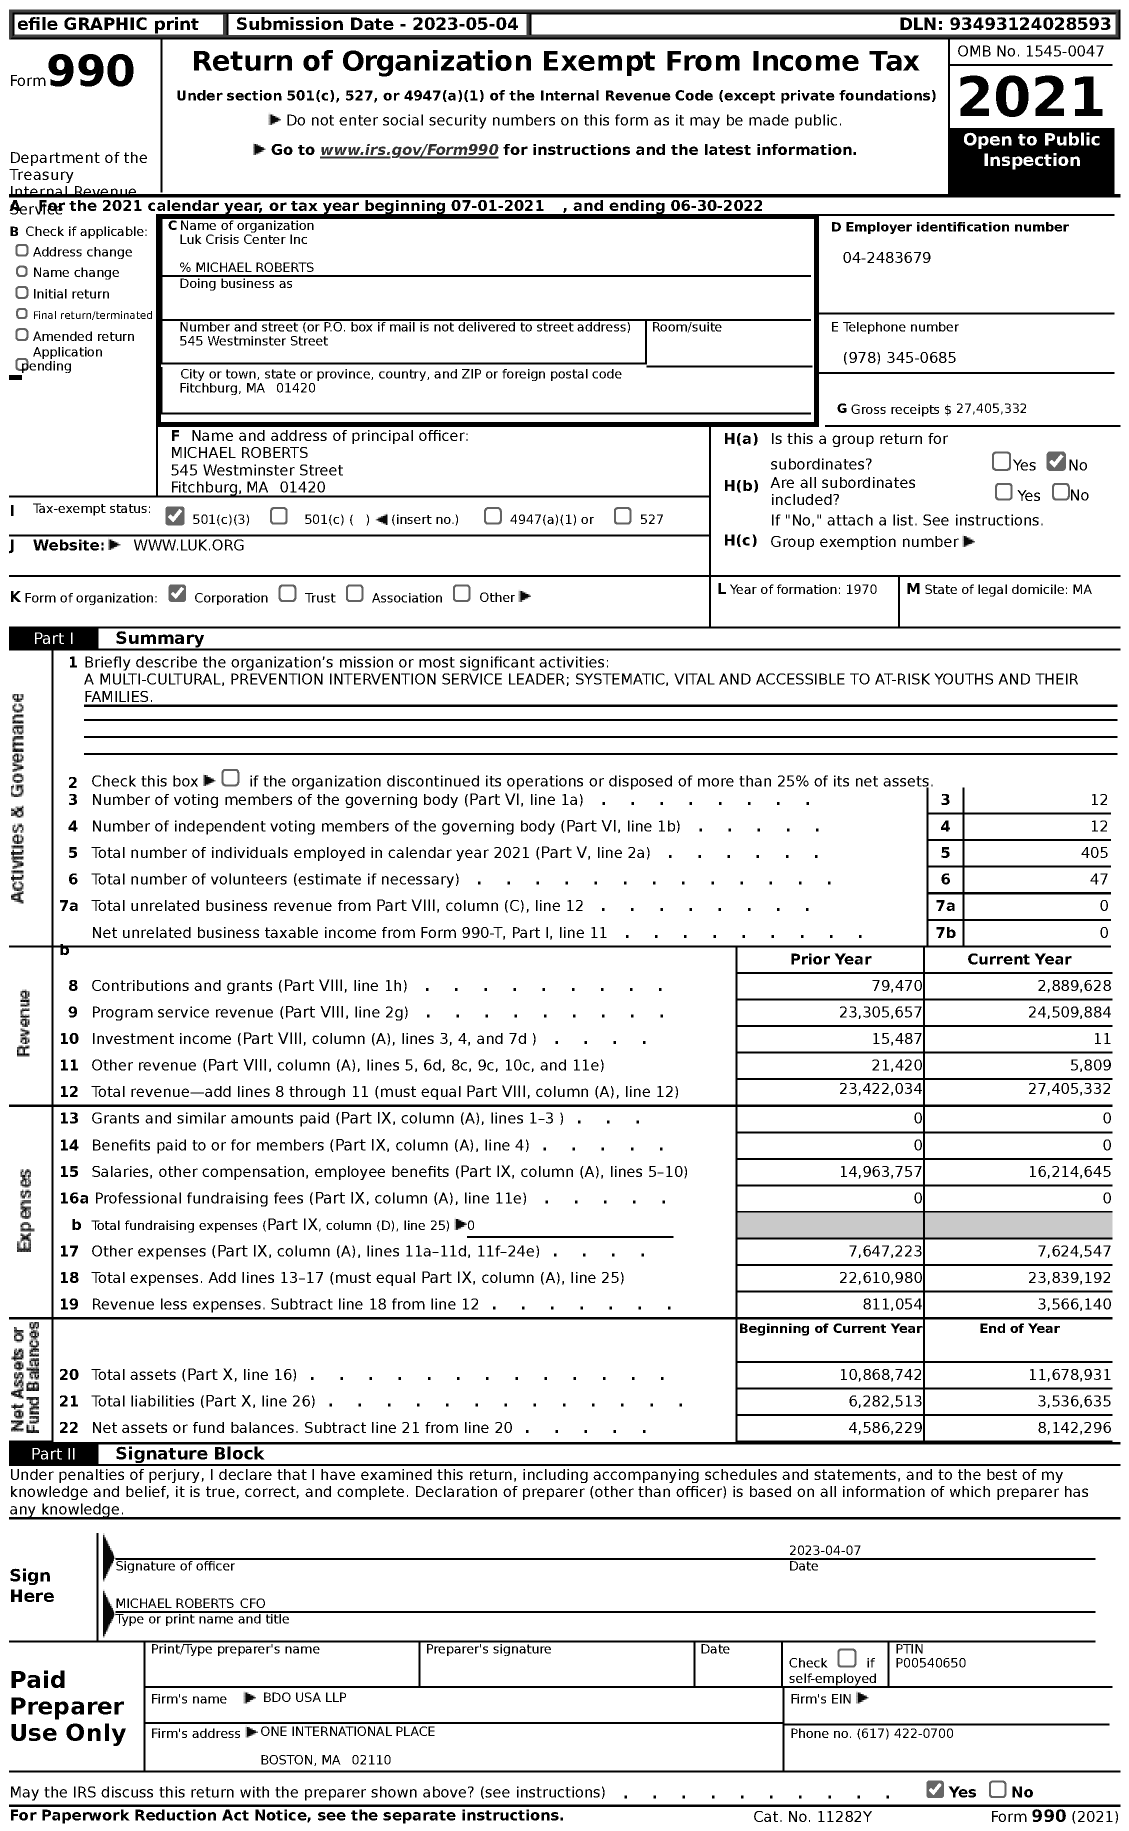 Image of first page of 2021 Form 990 for LUK Crisis Center